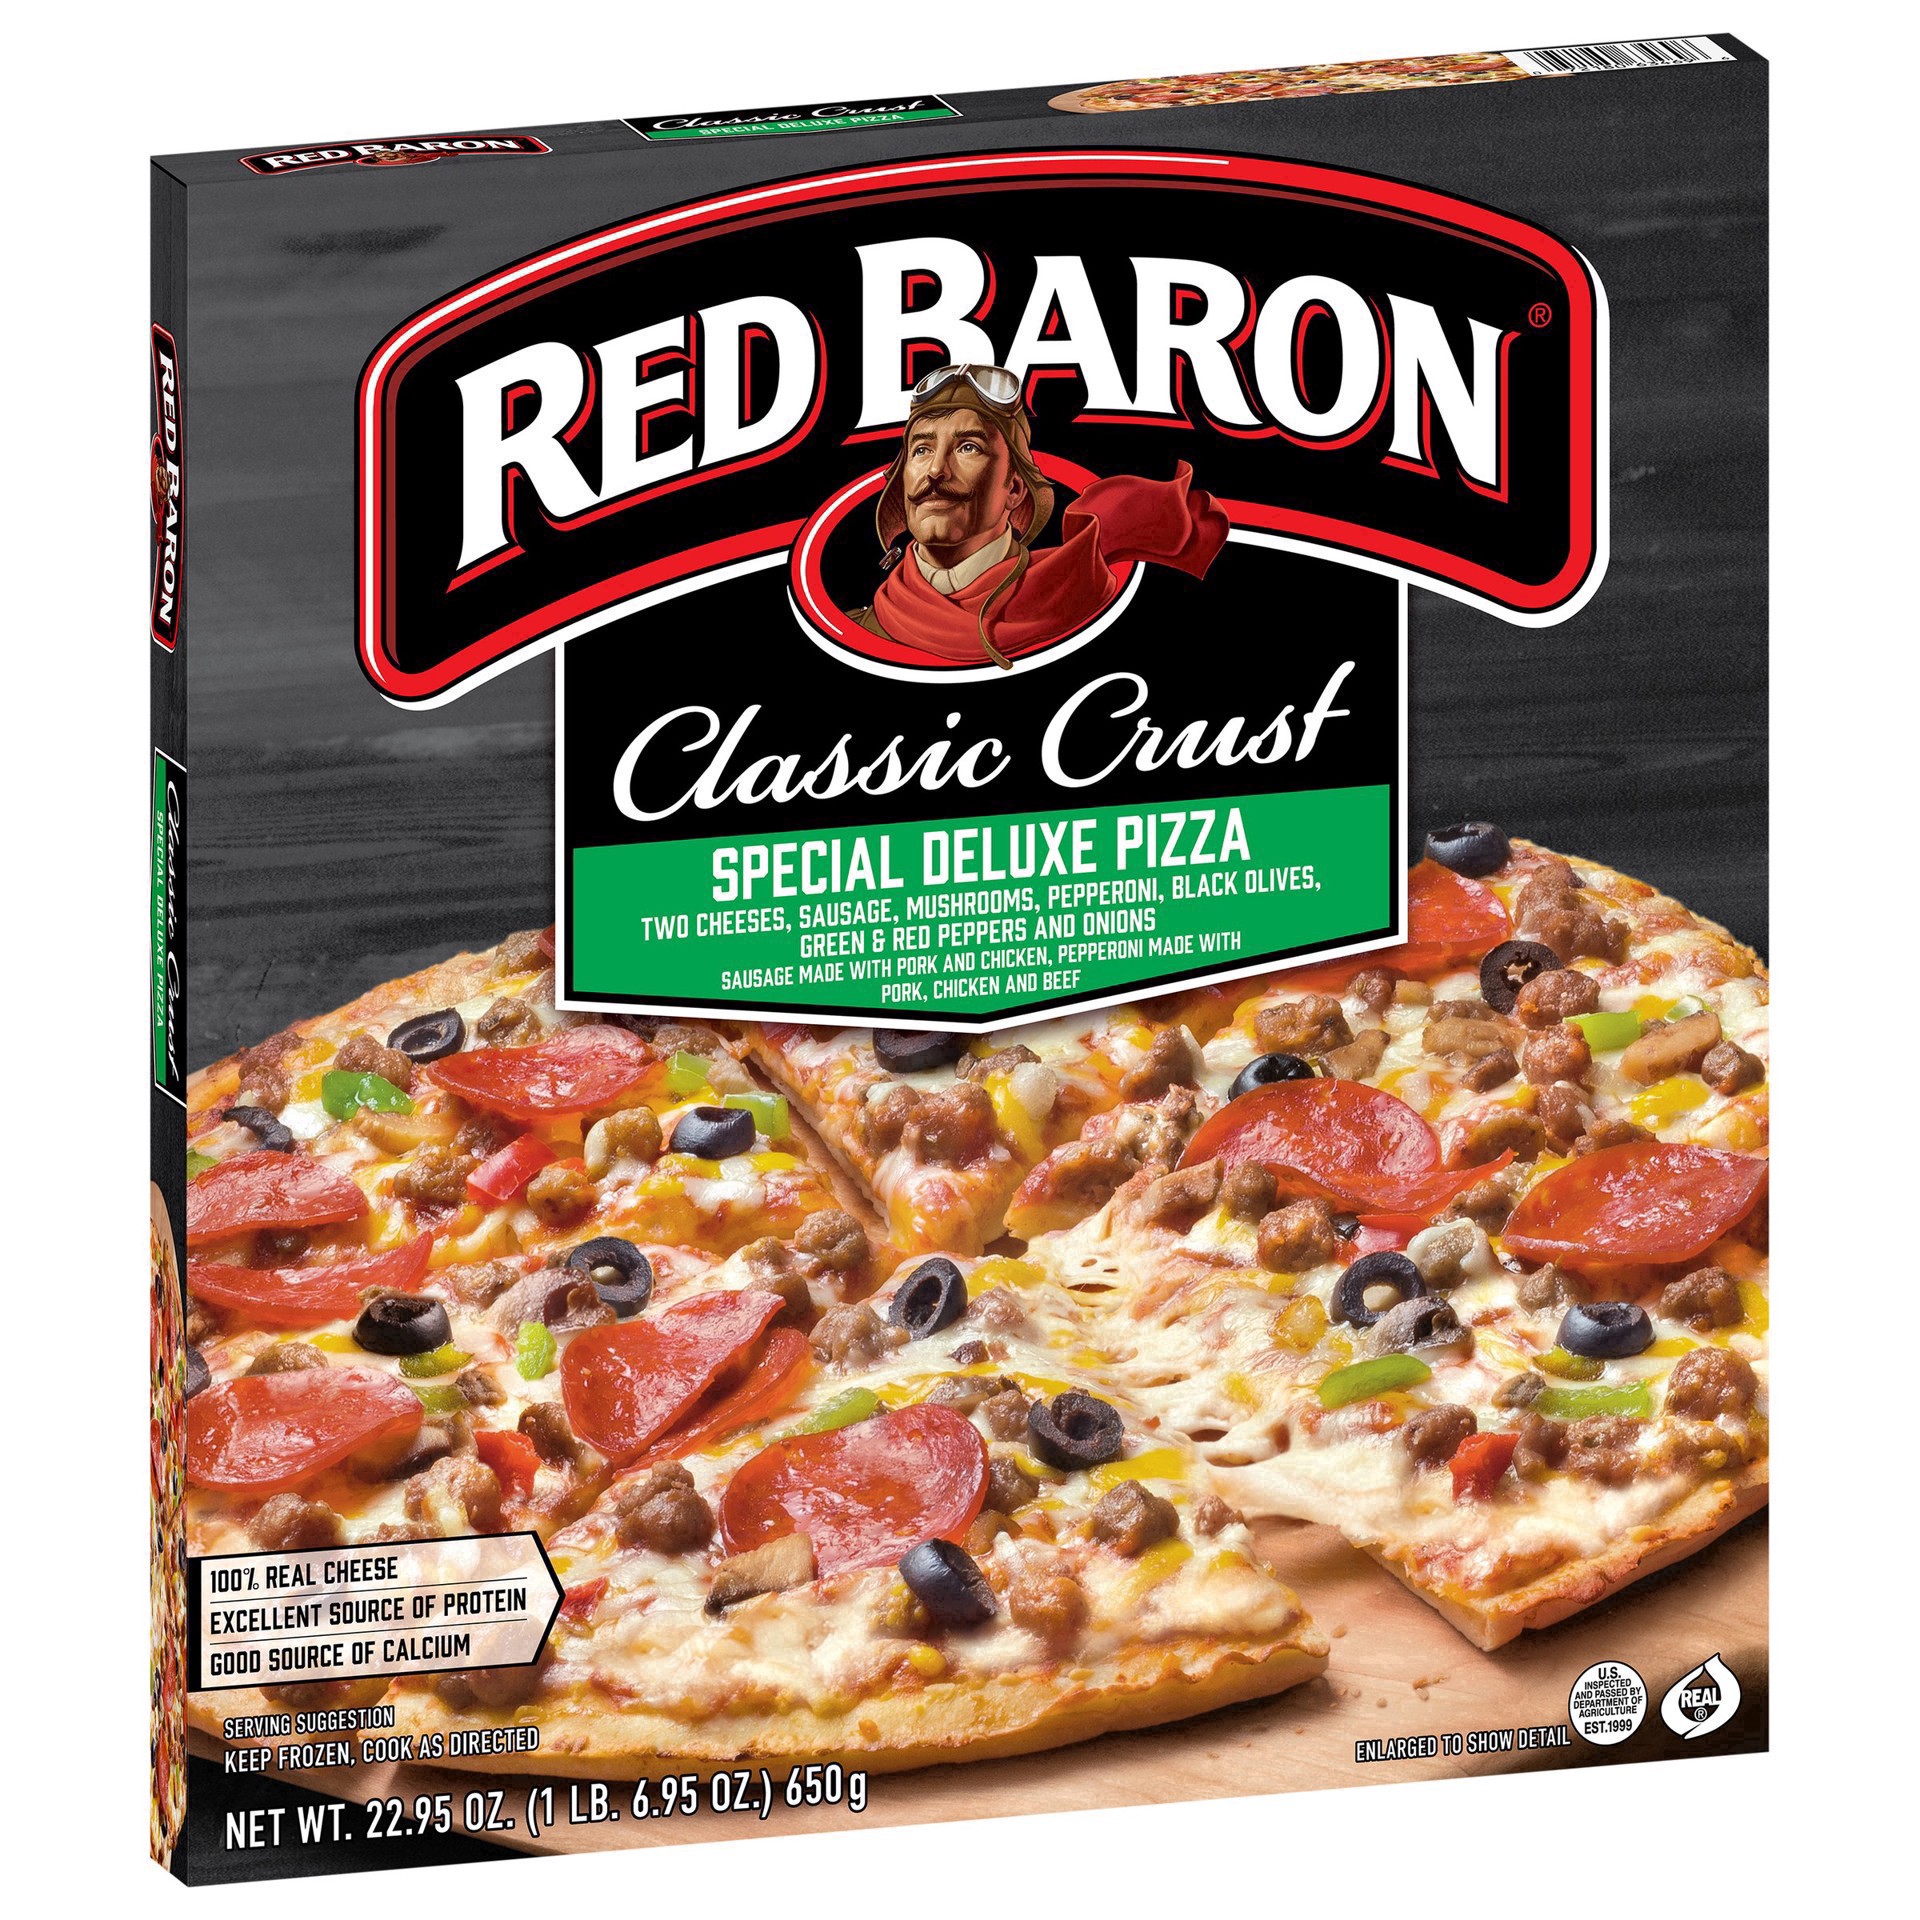 slide 64 of 89, Red Baron Frozen Pizza Classic Crust Special Deluxe, 1.43 lb